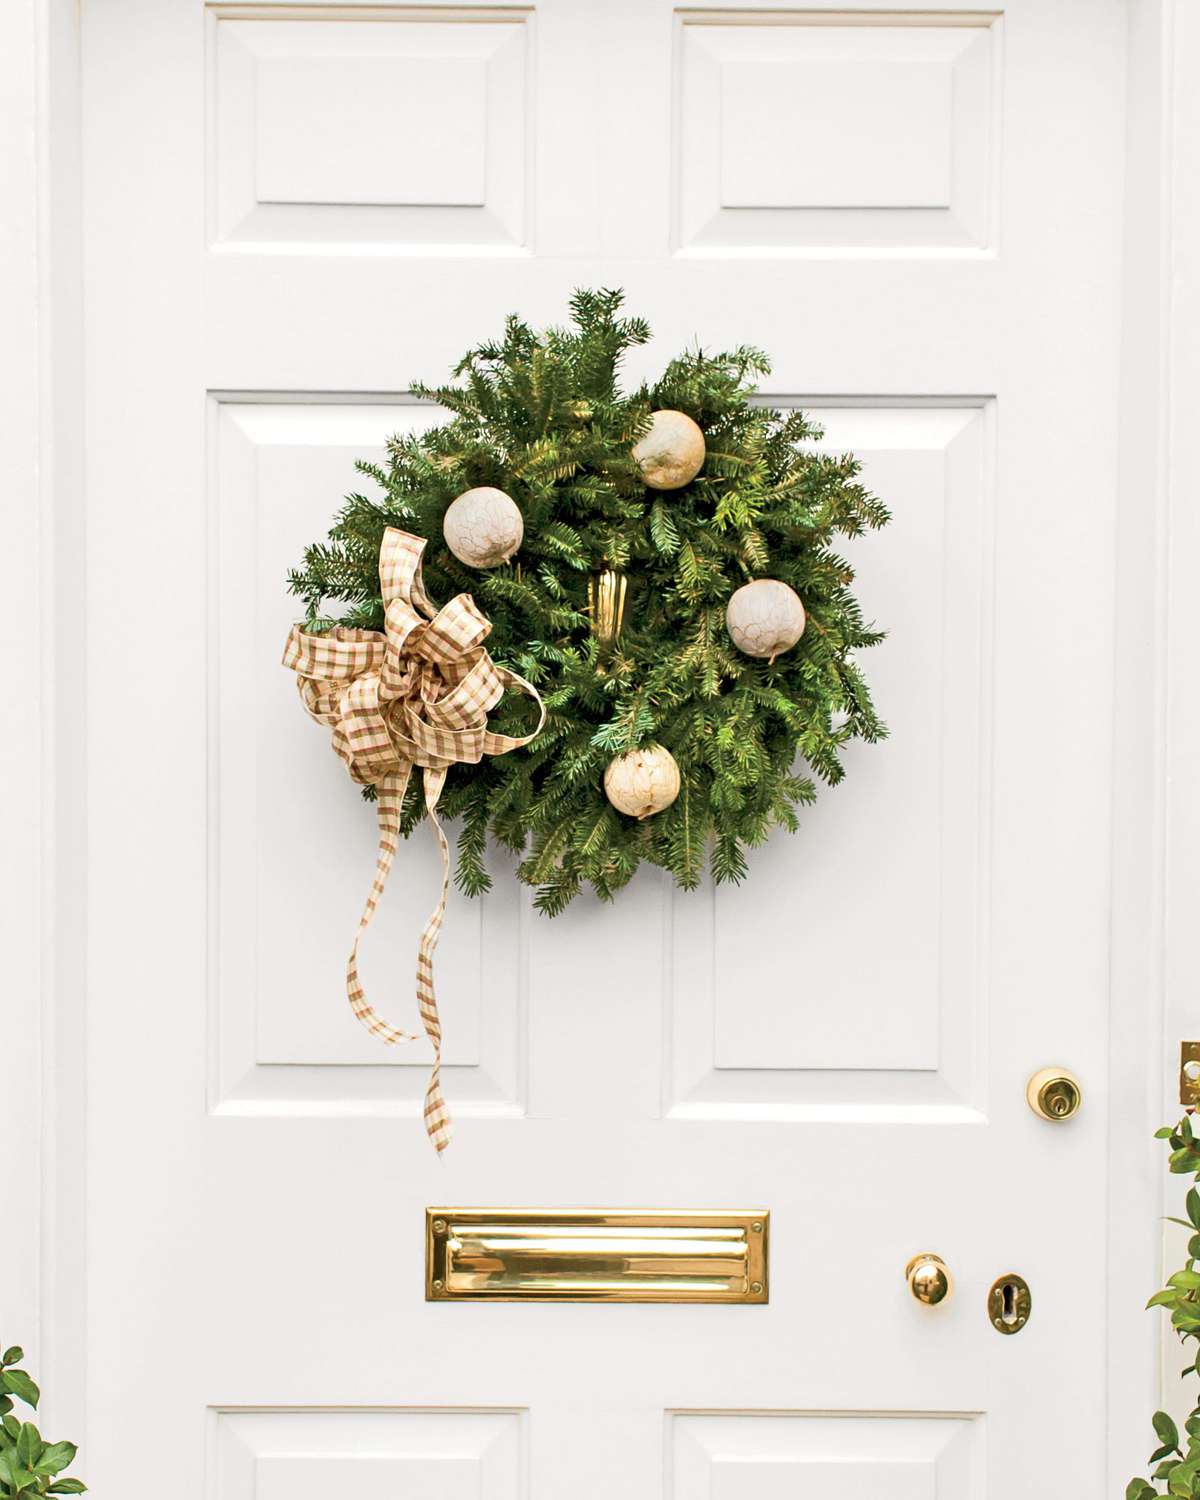 50 Christmas Wreath Ideas For Windows Doors And More Southern Living